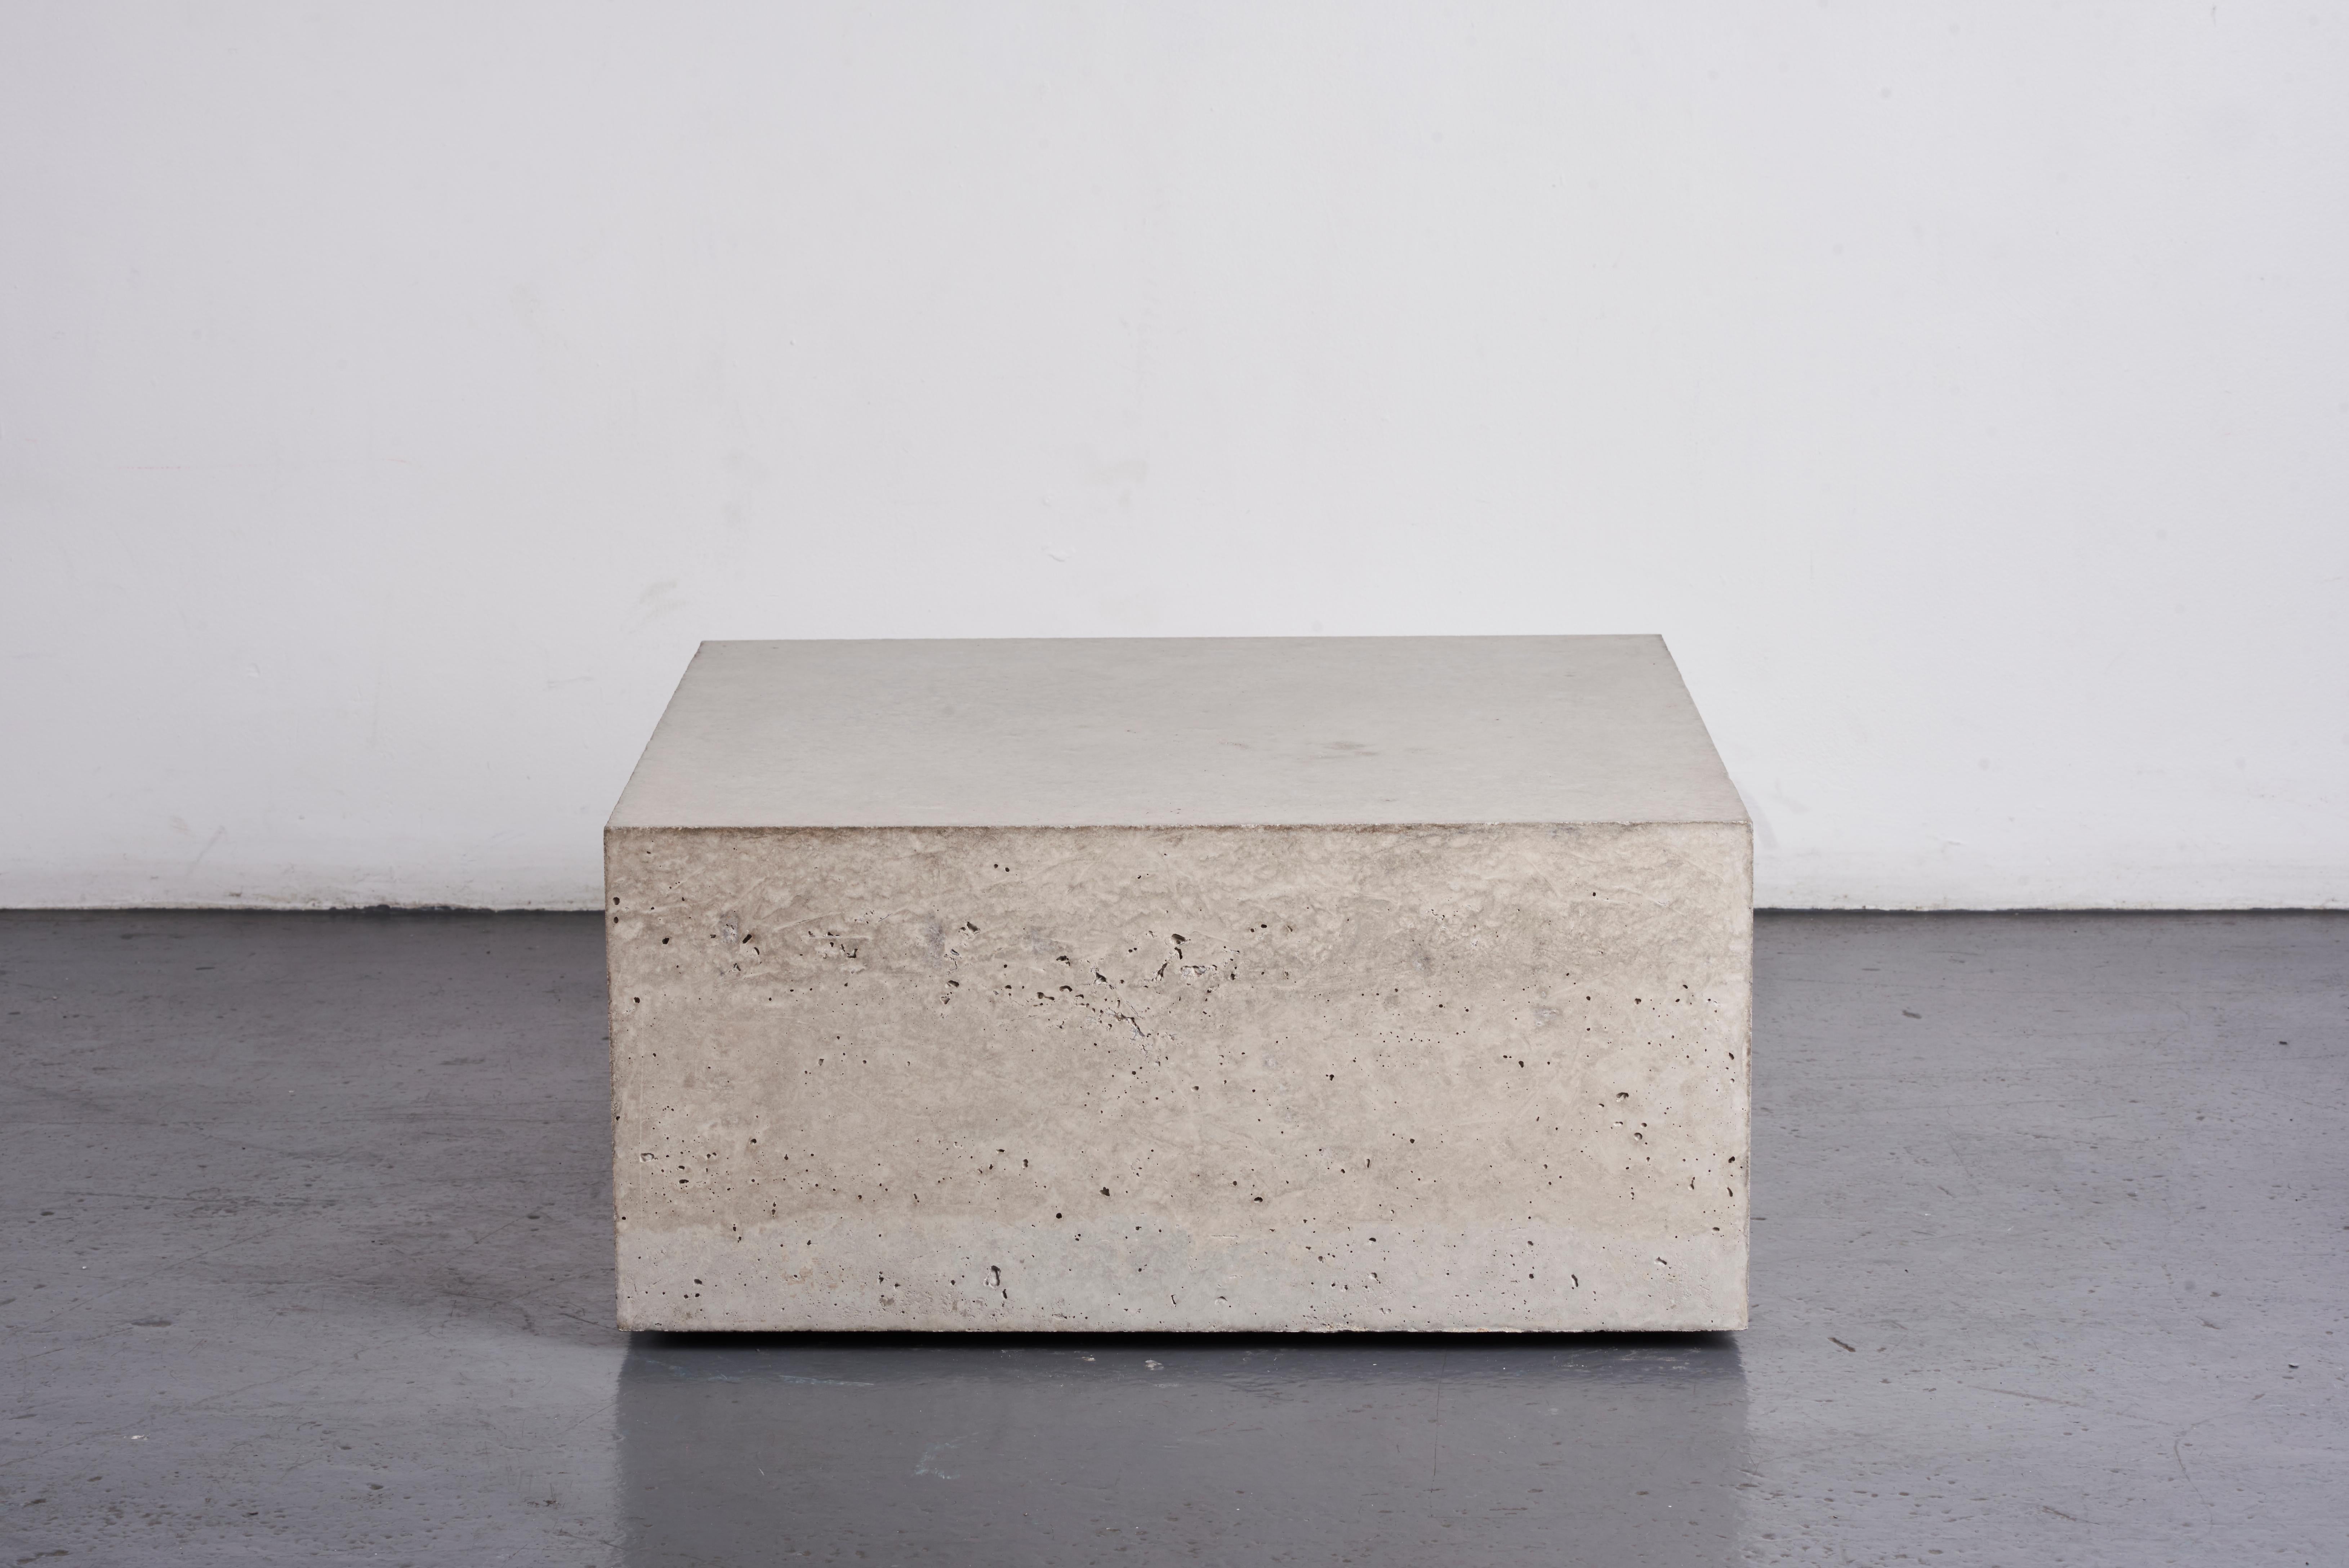 Contemporary 'Ilha' Reinforced Concrete Table, One of a Kind Artwork by Littlewhitehead